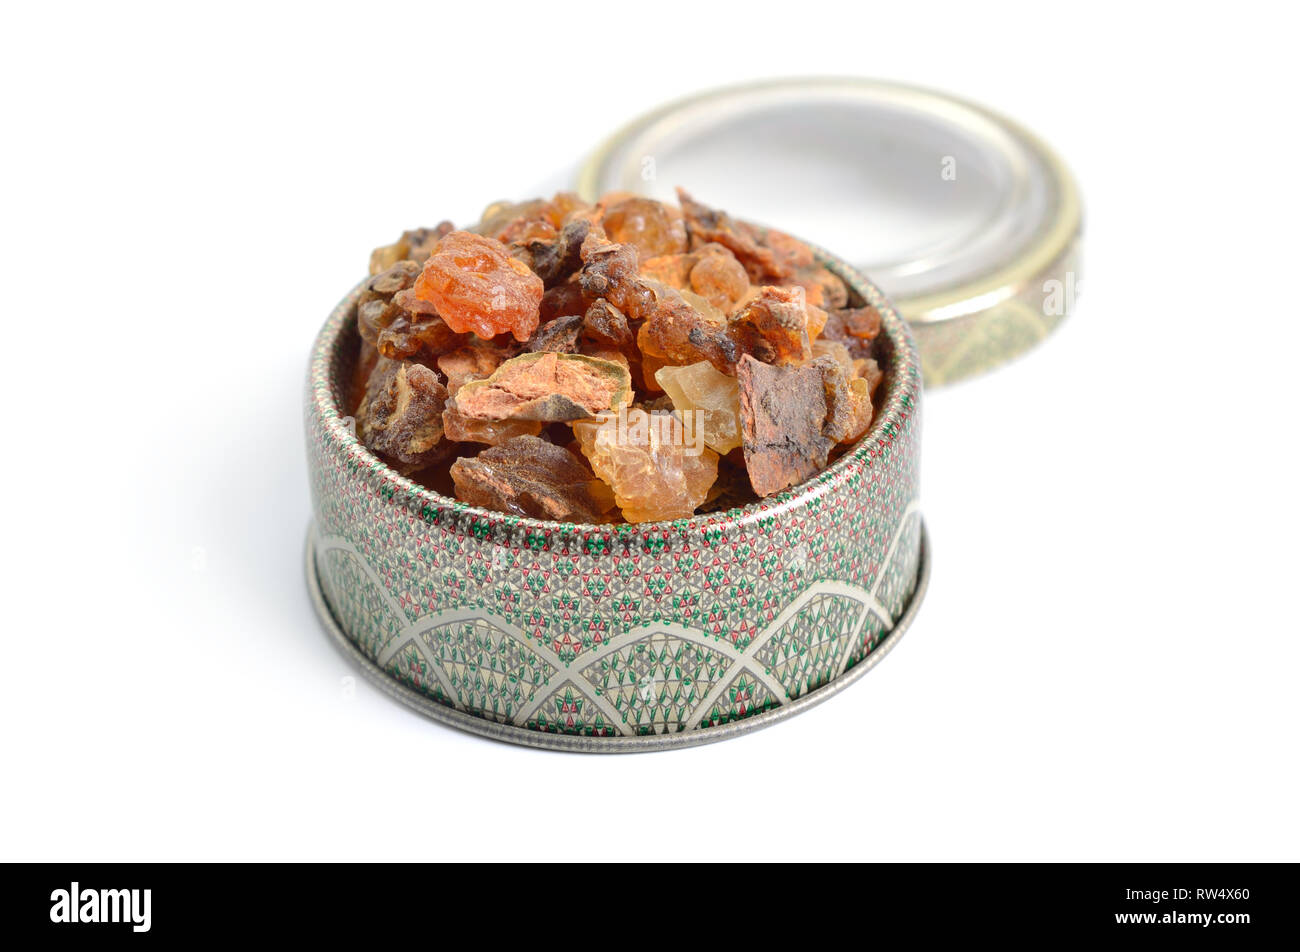 Myrrh is a natural gum or resin extracted from a number of small, thorny tree species of the genus Commiphora Isolated on white, Stock Photo